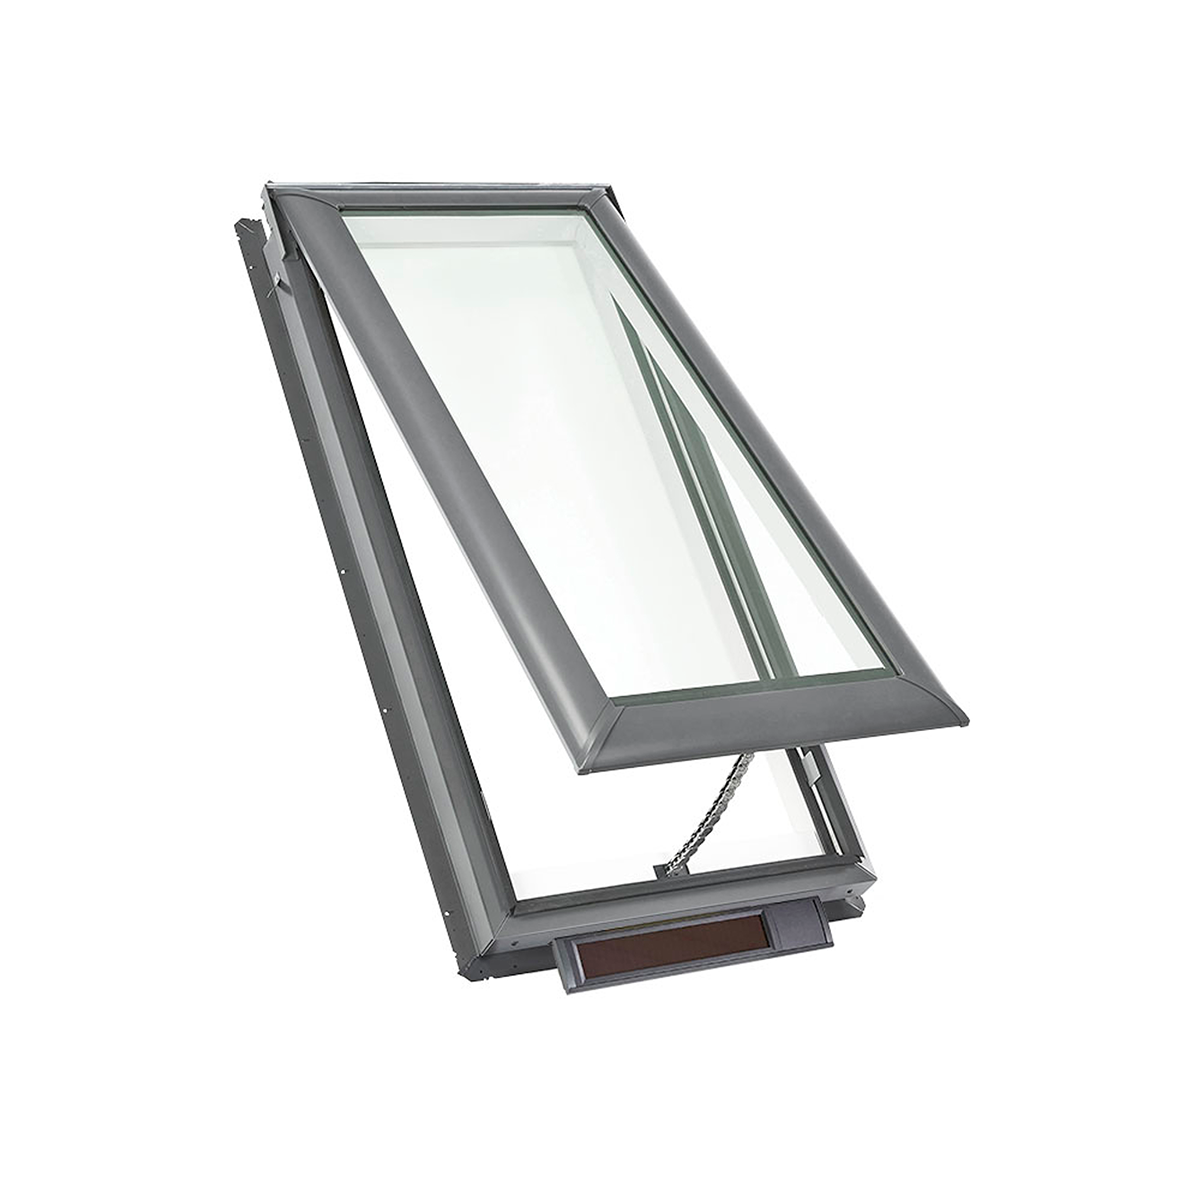 Solar Powered Deck-Mount Skylight with Laminated Low-E3 Glass - 21 in. x 45-3/4 in. - VSS C06